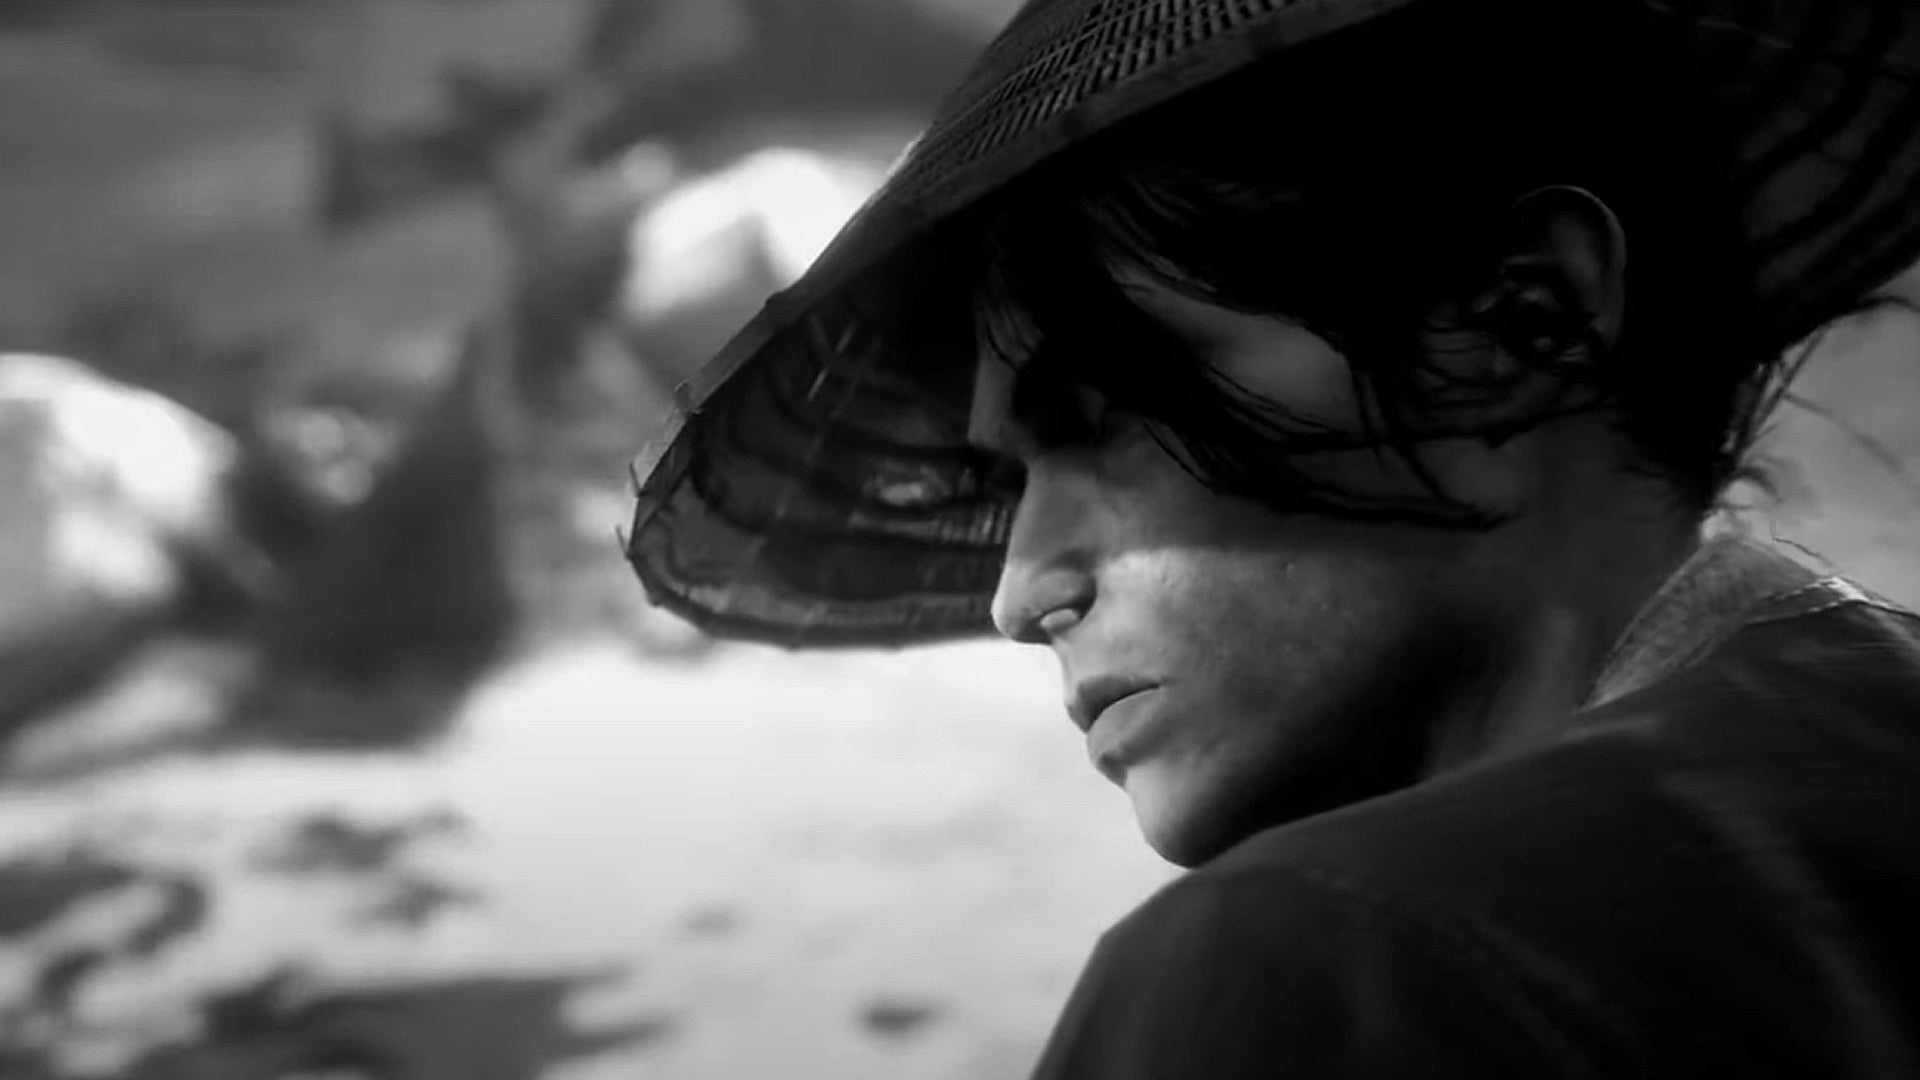 Trek to Yomi: A side-scrolling samurai adventure that plays out in black and white. 1920x1080 Full HD Background.